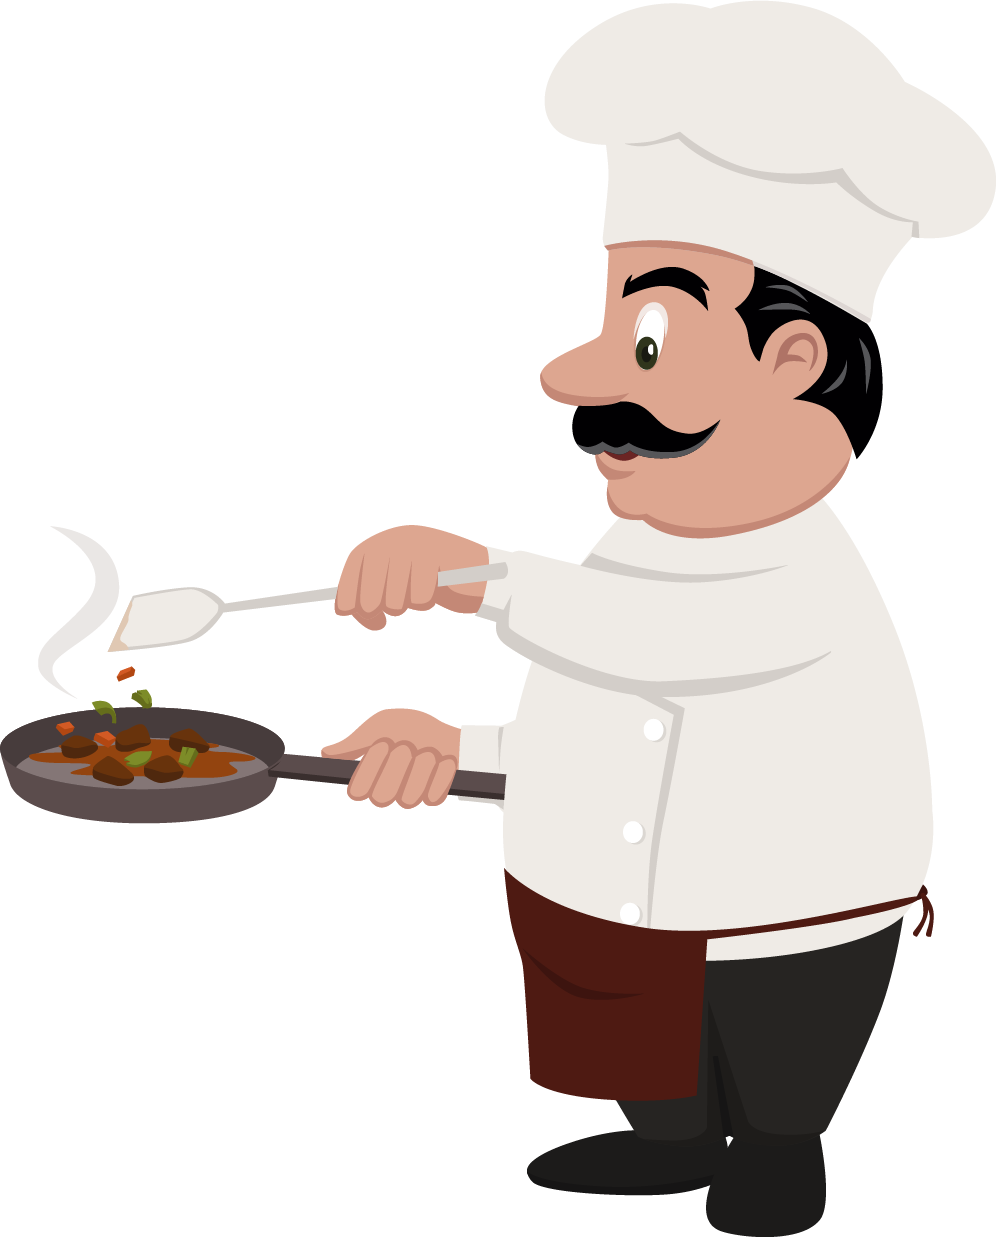 Chef Cook Vector PNG Image High Quality PNG Image